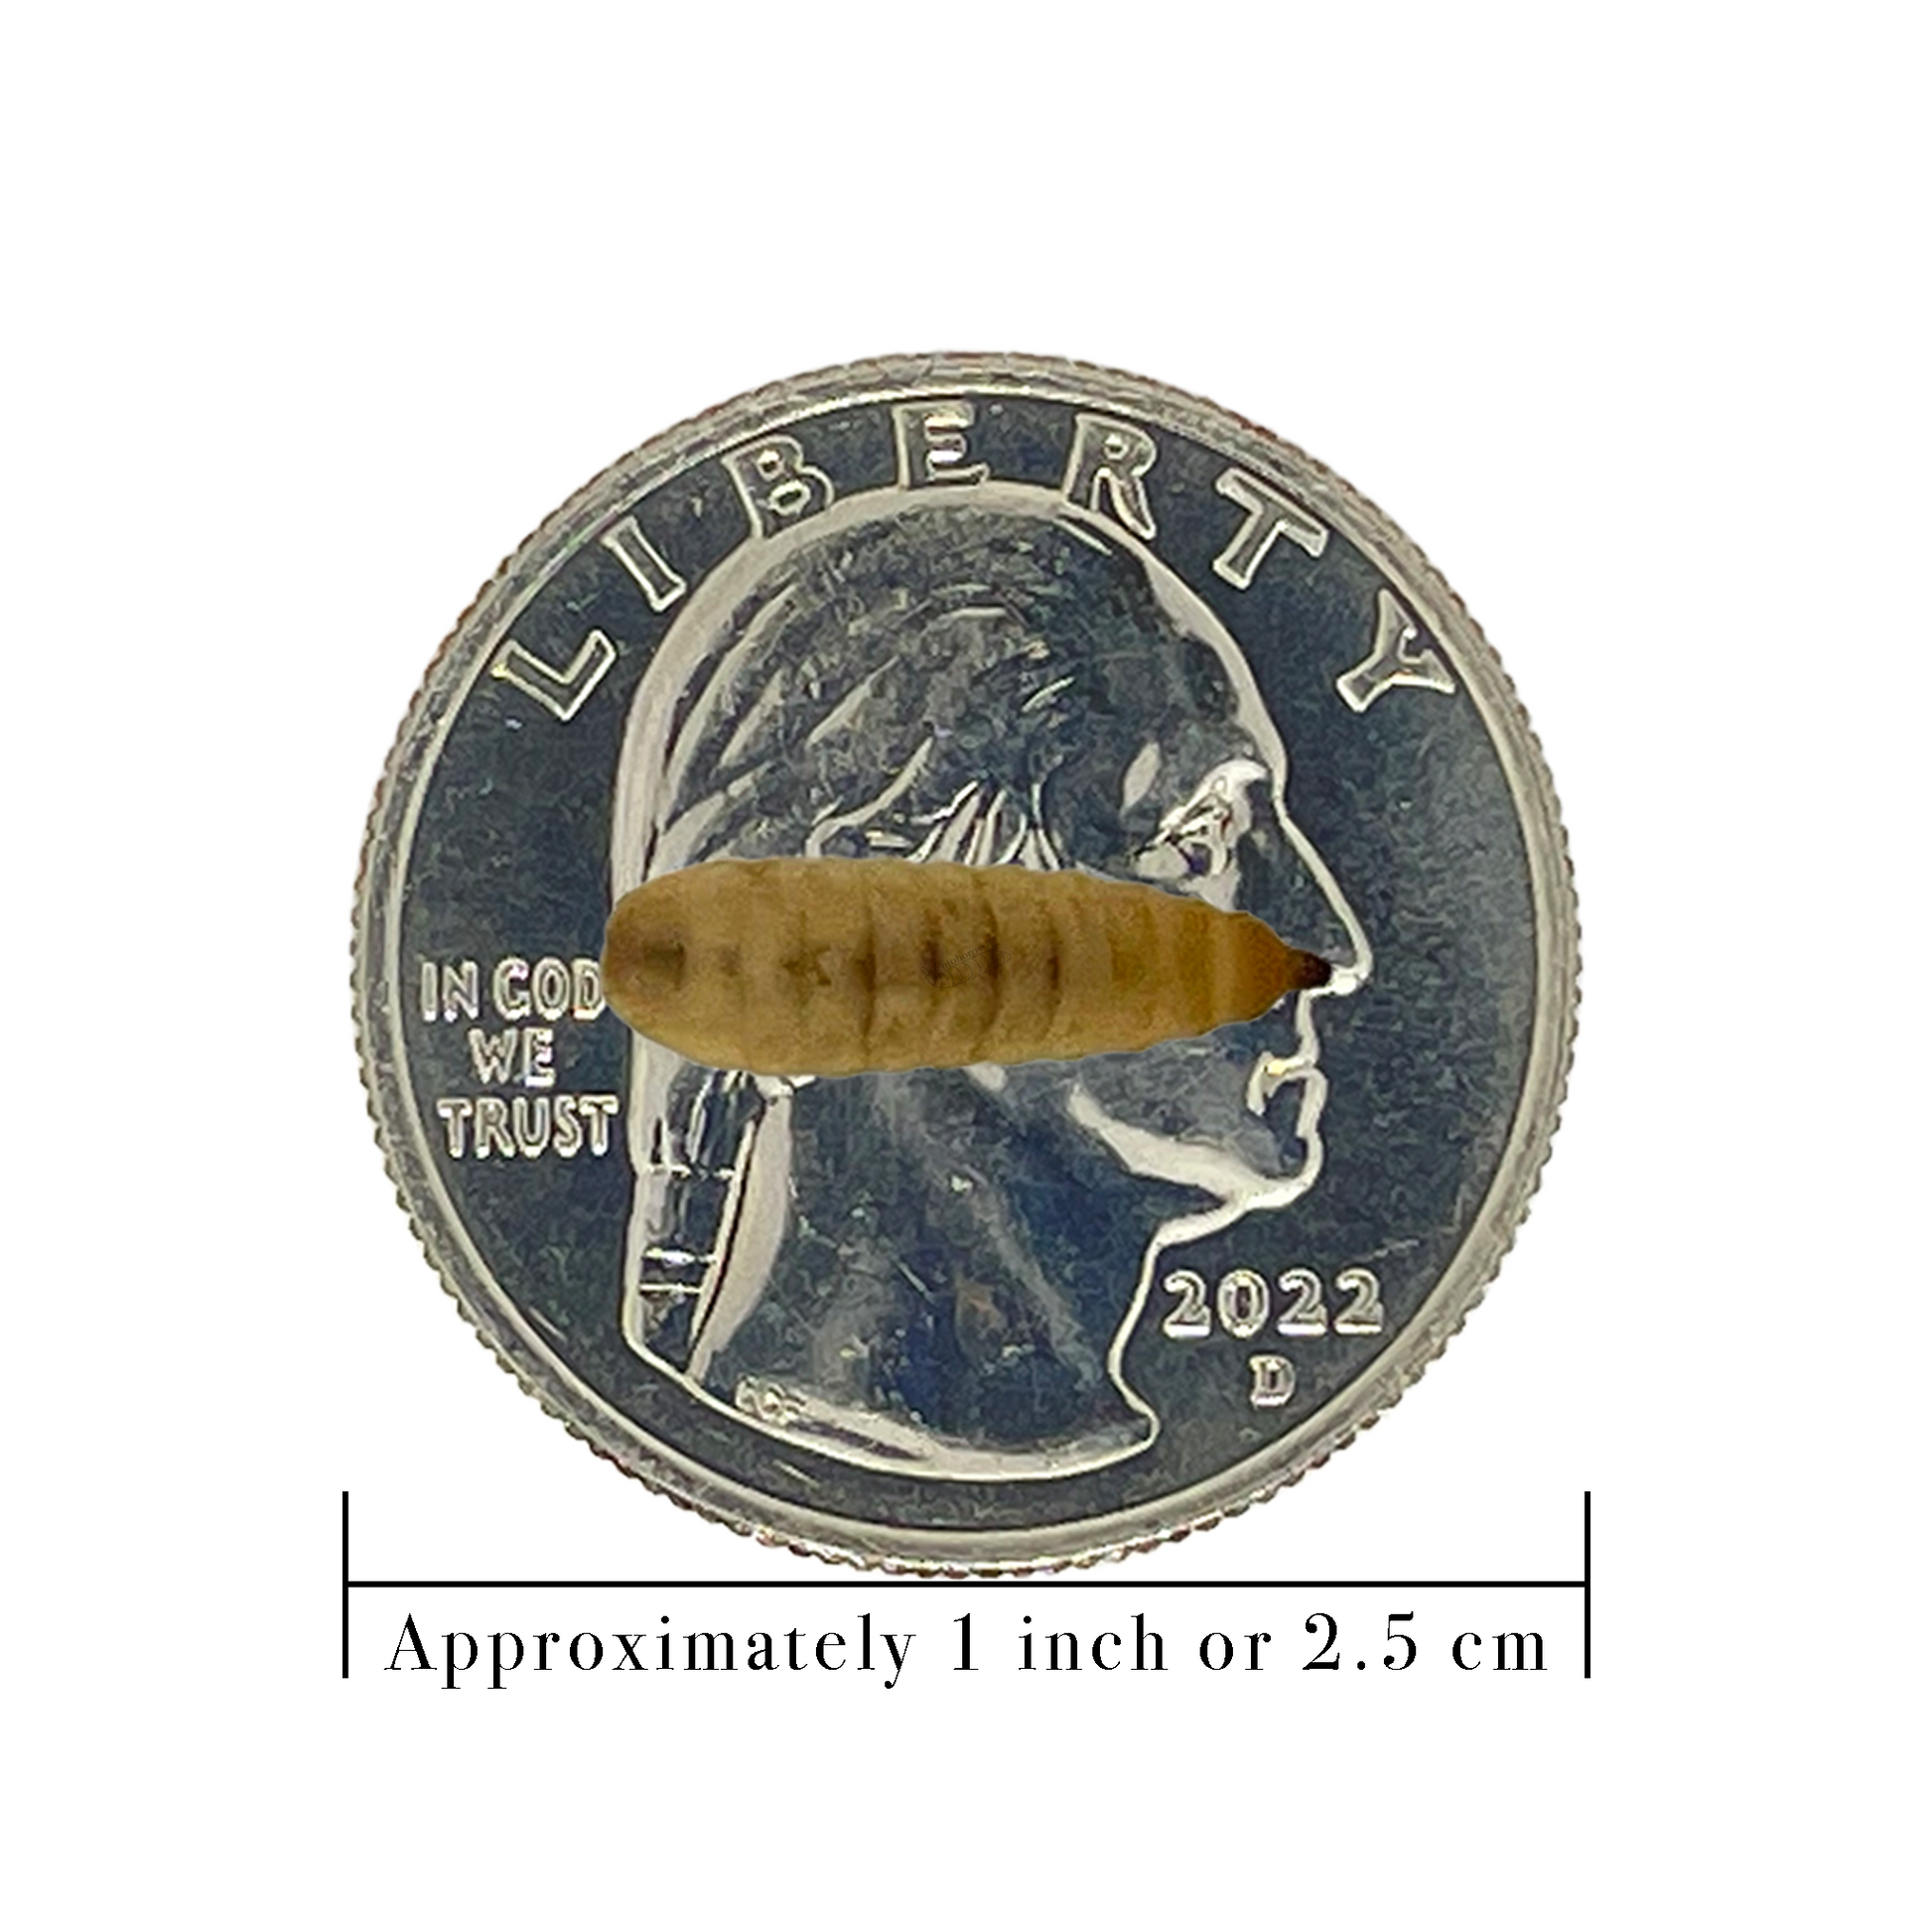 Medium Black Soldier Fly Larva on a quarter with a scale for 1 inch below it.